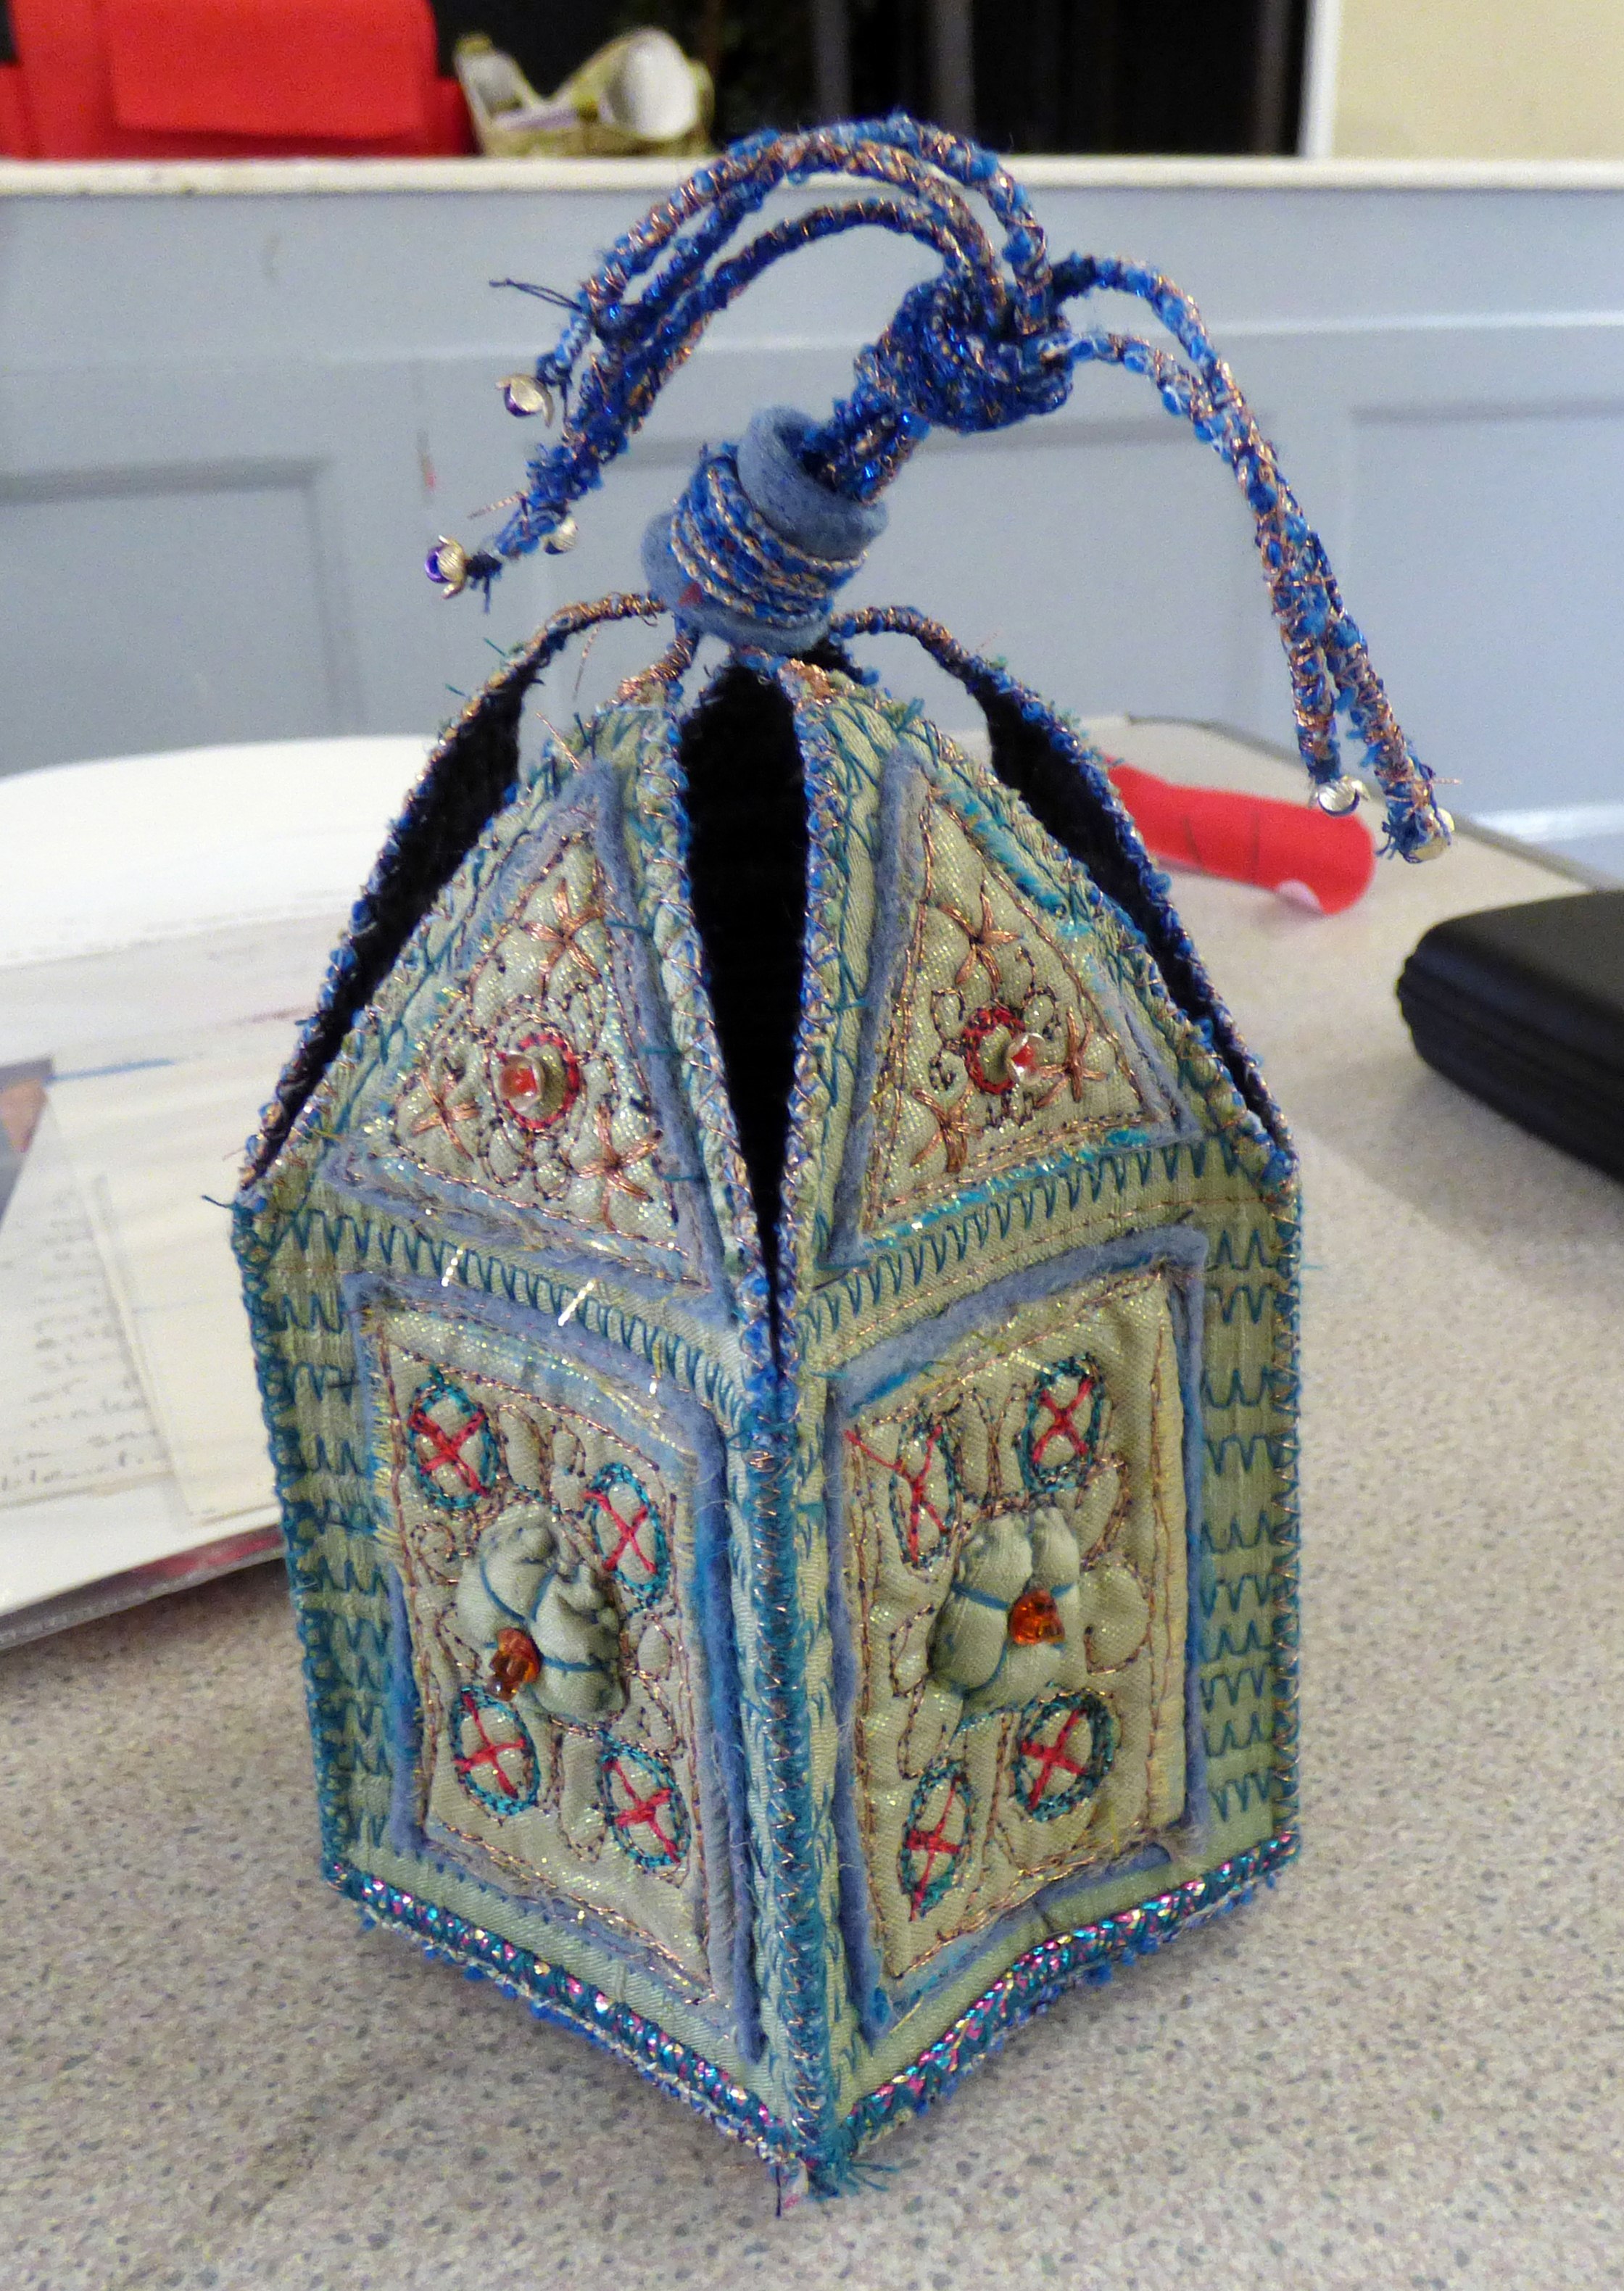 sample by Sheila Conchie at 5 sided casket workshop, July 2019